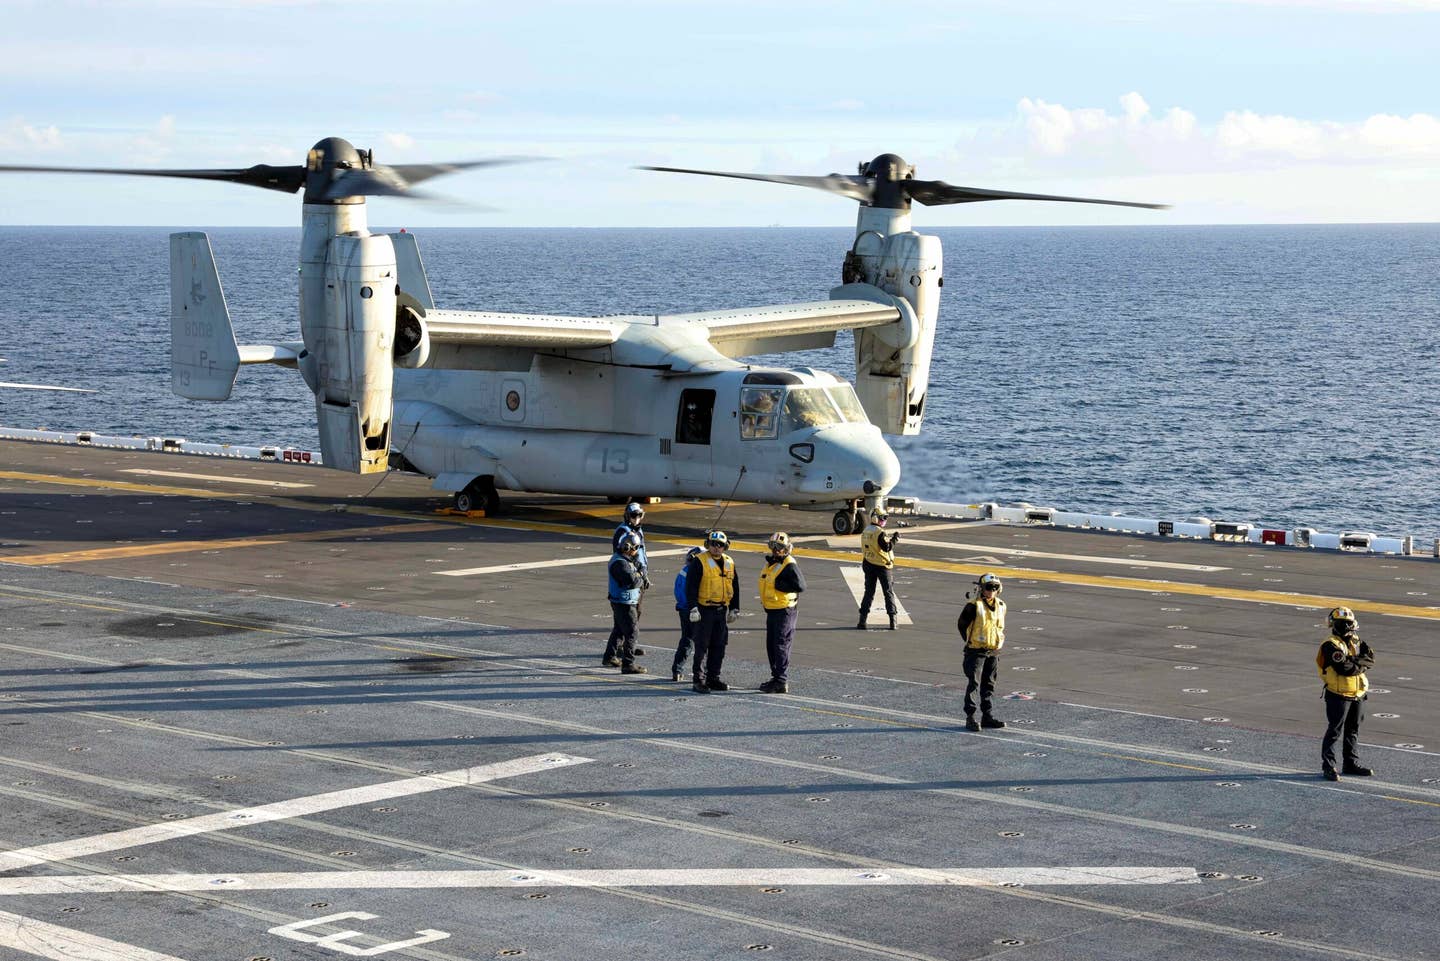 U.S. Navy Sailors with the amphibious assault ship USS <em>Tripoli</em> (LHA 7), chain down an MV-22B Osprey with Marine Medium Tiltrotor Squadron 364, Marine Aircraft Group 39, 3rd Marine Aircraft Wing (MAW), during exercise Steel Knight 2<em>i</em>, Dec. 5, 2022. Exercise Steel Knight provides 3rd MAW an opportunity to refine Wing-level warfighting in support of I Marine Expeditionary Force and fleet maneuver. (U.S. Marine Corps photo by Sgt. Samuel Fletcher) 